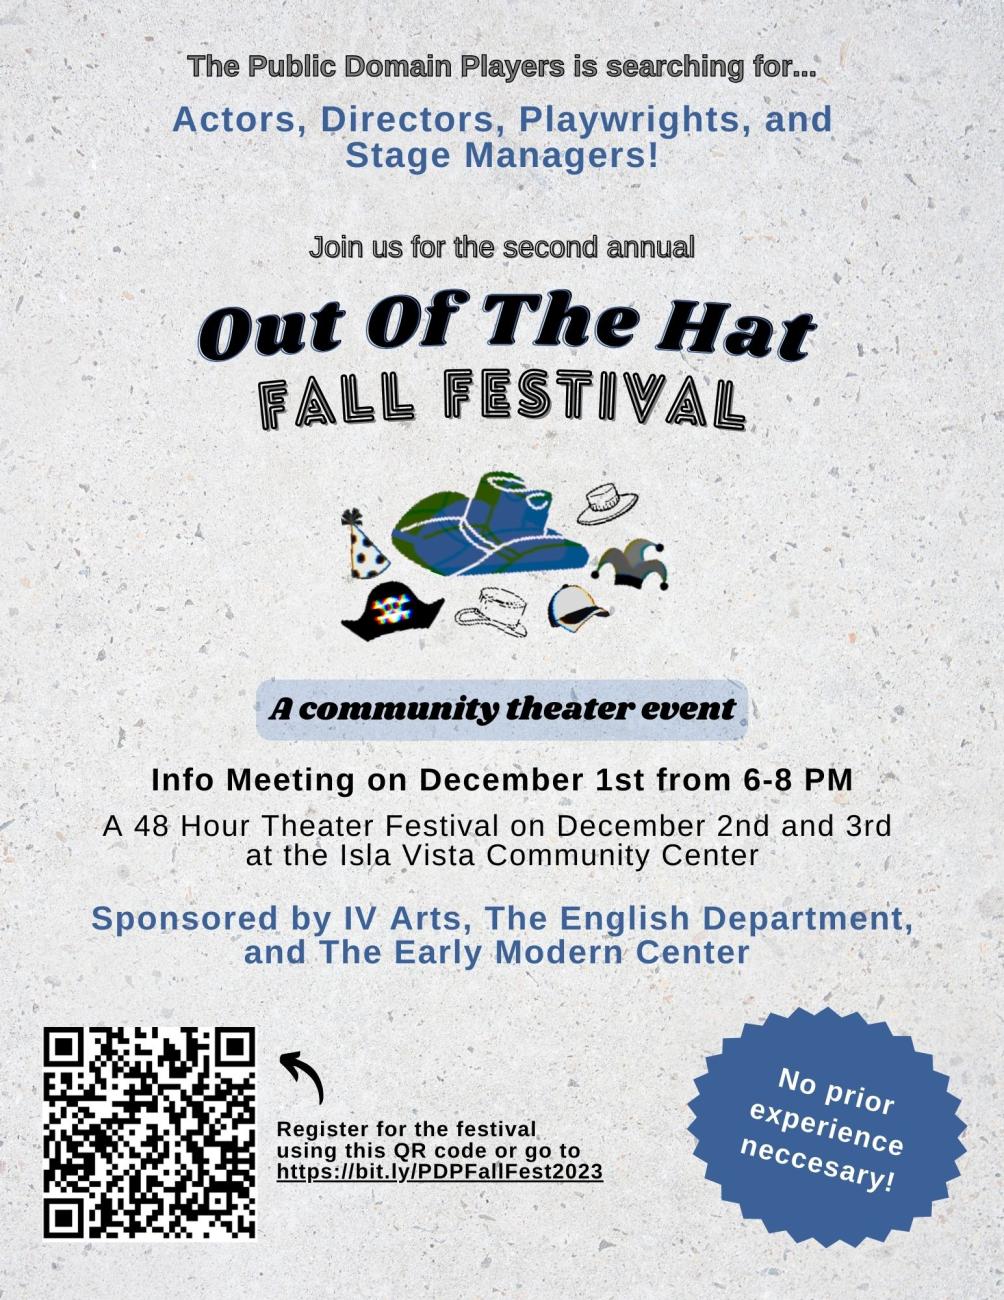 Out of the Hat Festival Flyer